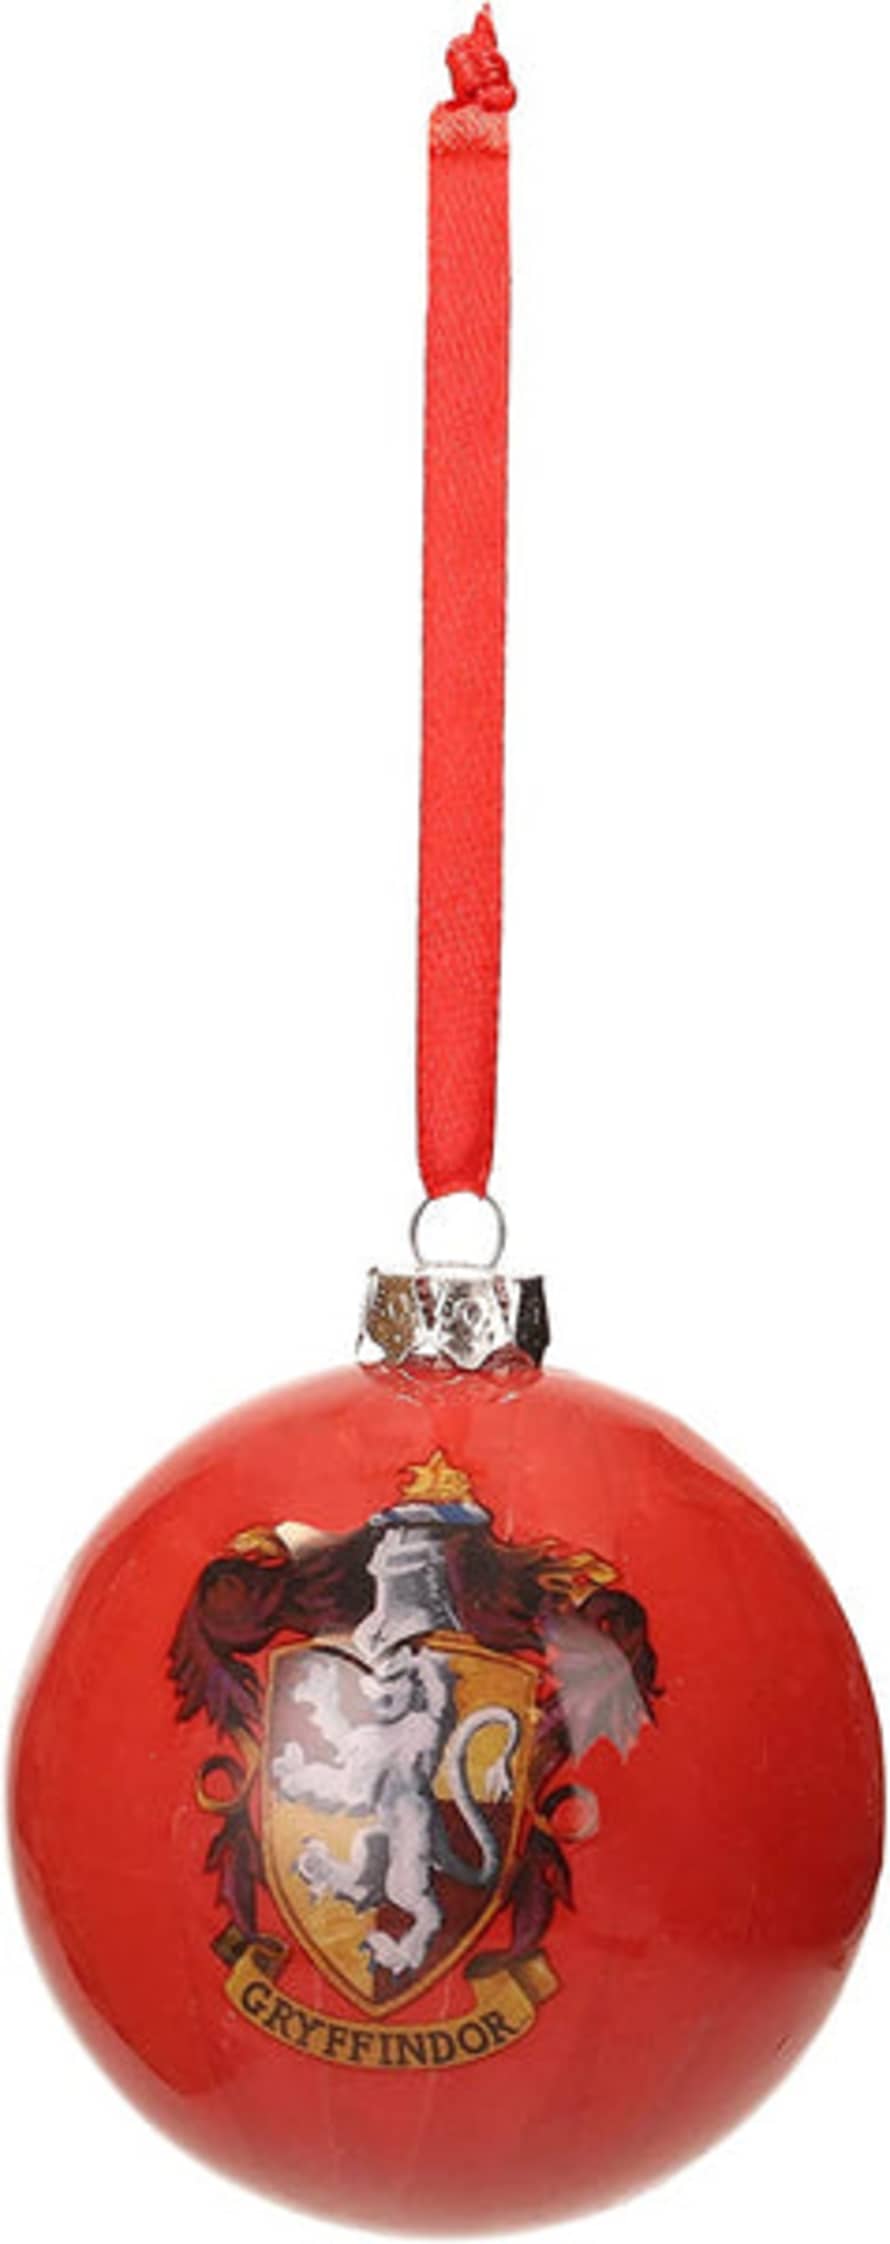 SD Toys Harry Potter Christmas Ornament Bauble Gryffindor House